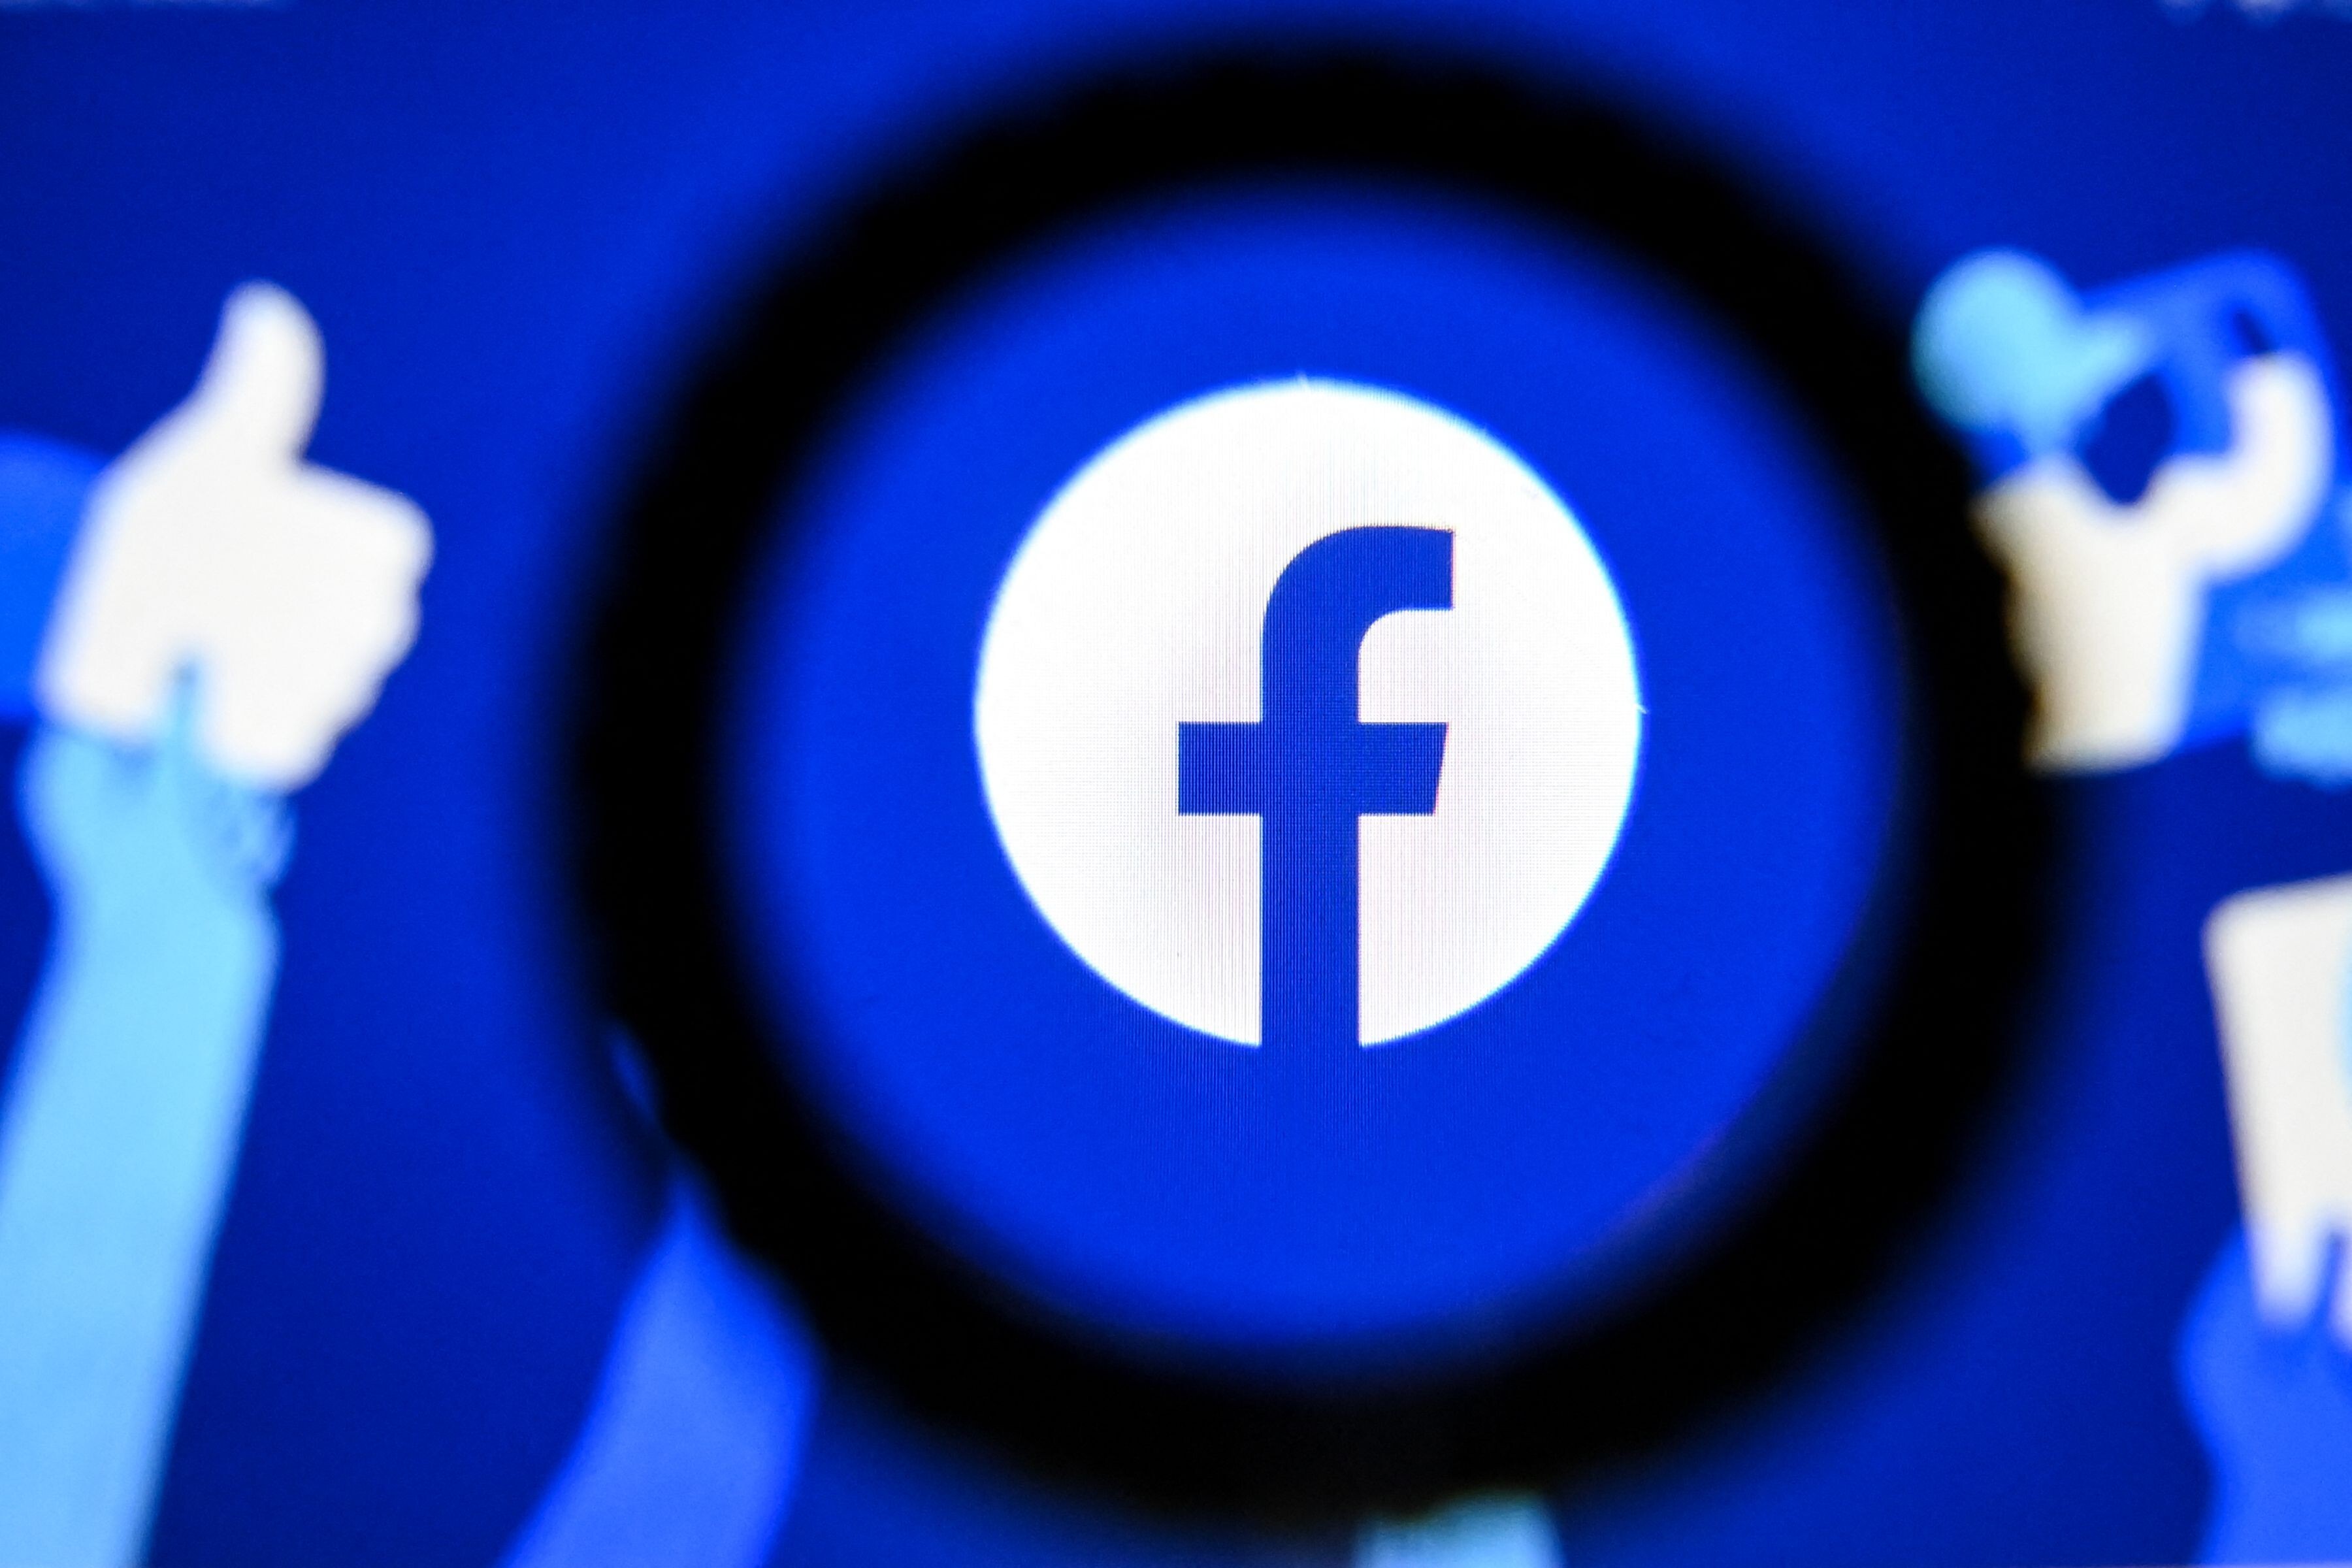 Facebook is battling one of its worst crises ever, with reams of internal documents leaked to reporters, lawmakers and US regulators fuelling fresh calls for government regulation. Photo: AFP